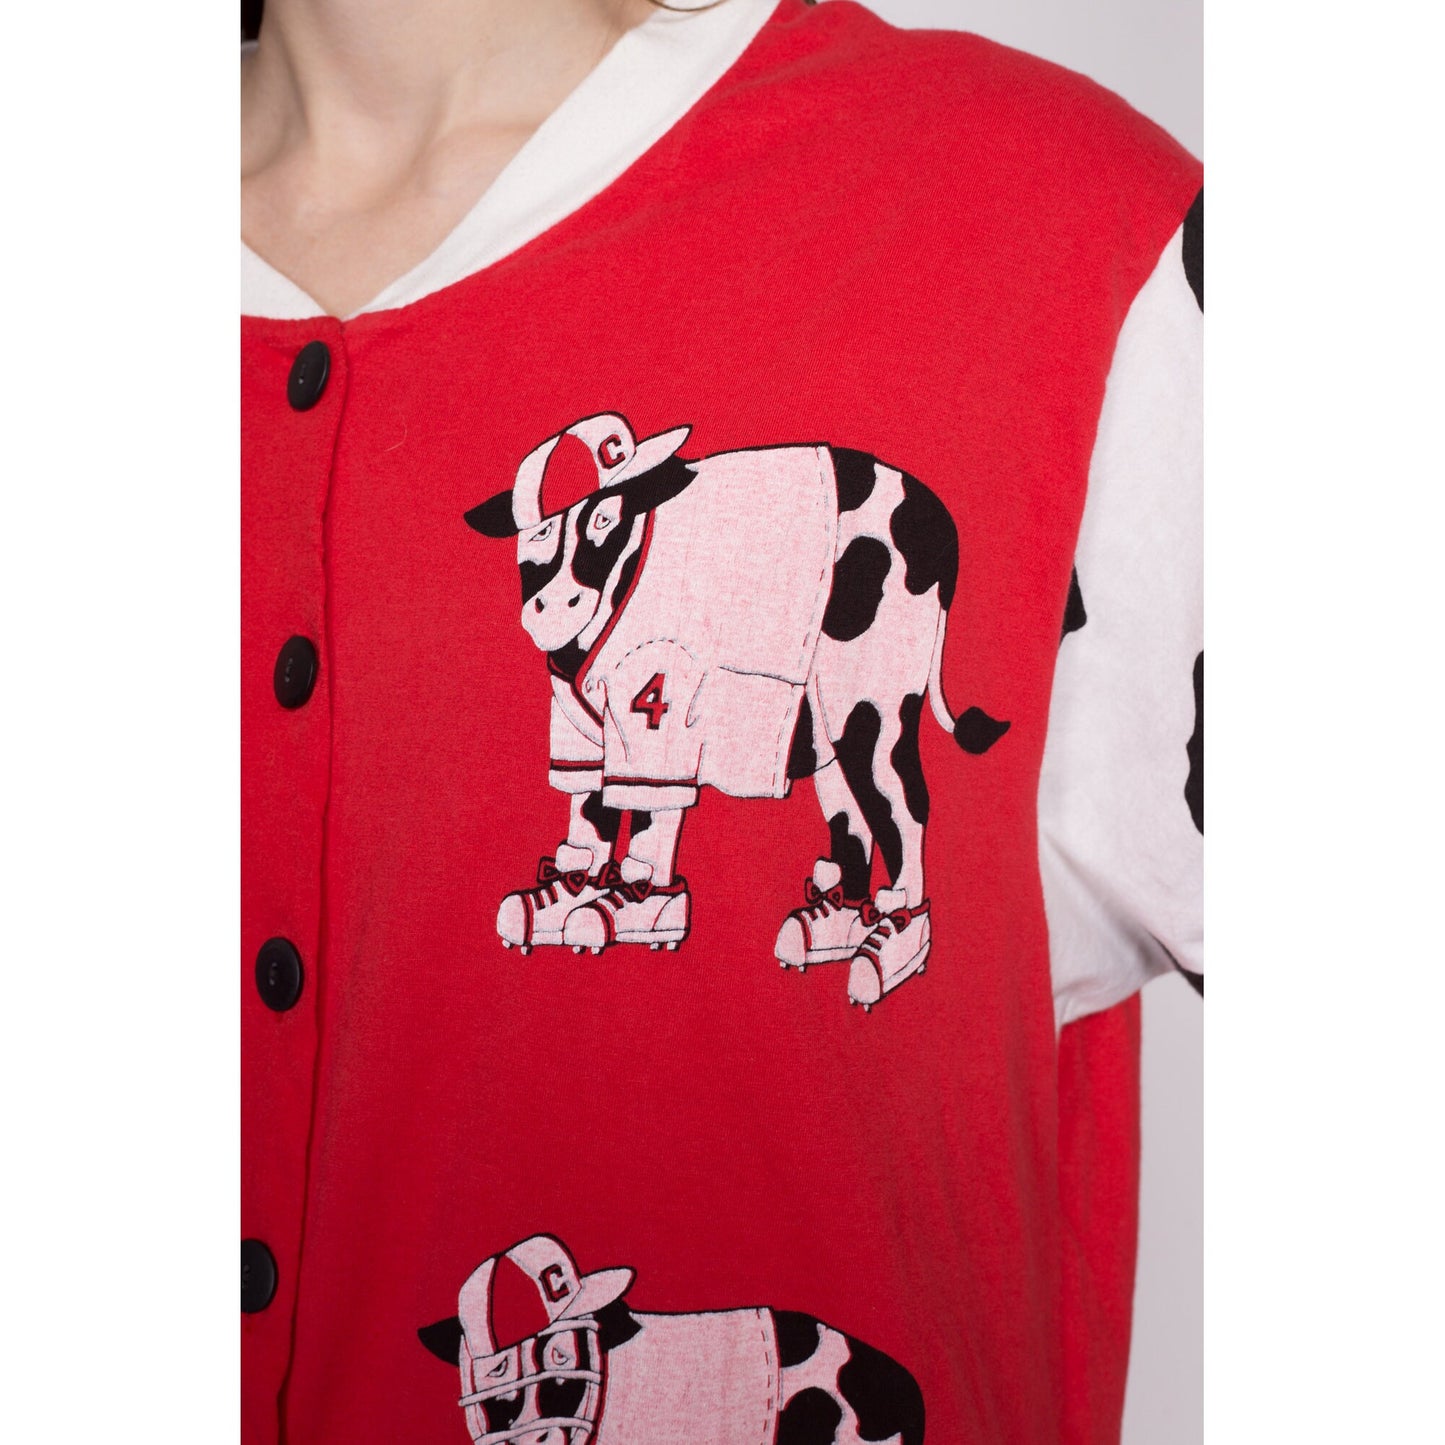 M-L| 80s Retro Cow Romper - Medium to Large | Vintage Red White Slouchy Loungewear Playsuit Outfit